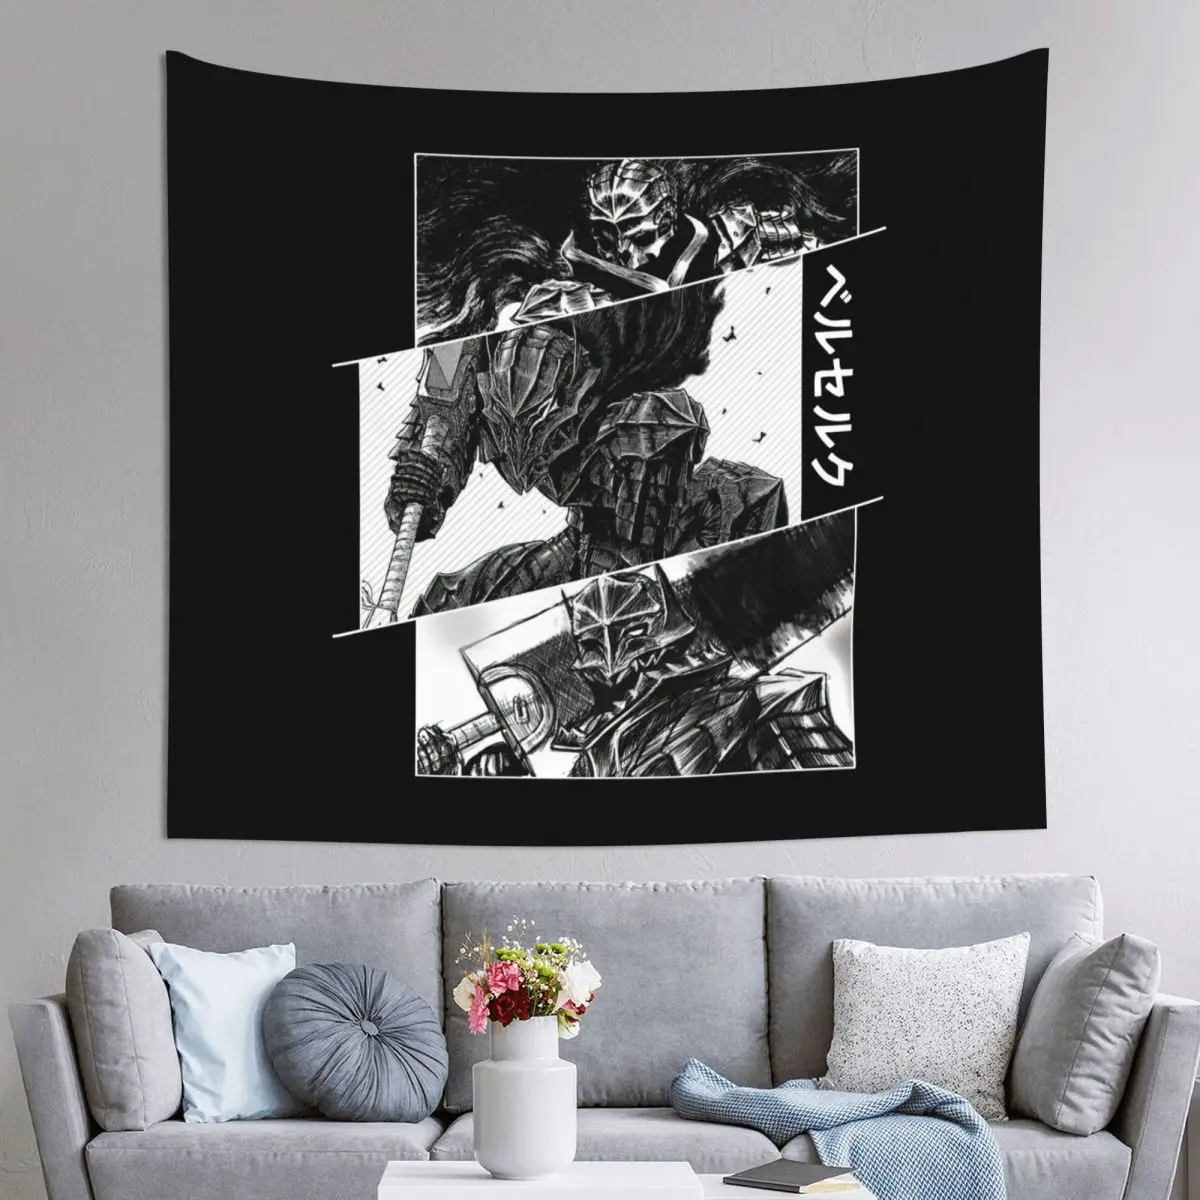 

Berserk Armor Guts Tapestry Colorful Polyester Wall Hanging Anime Black Swordsman Room Decor Curtain Psychedelic Wall Blanket